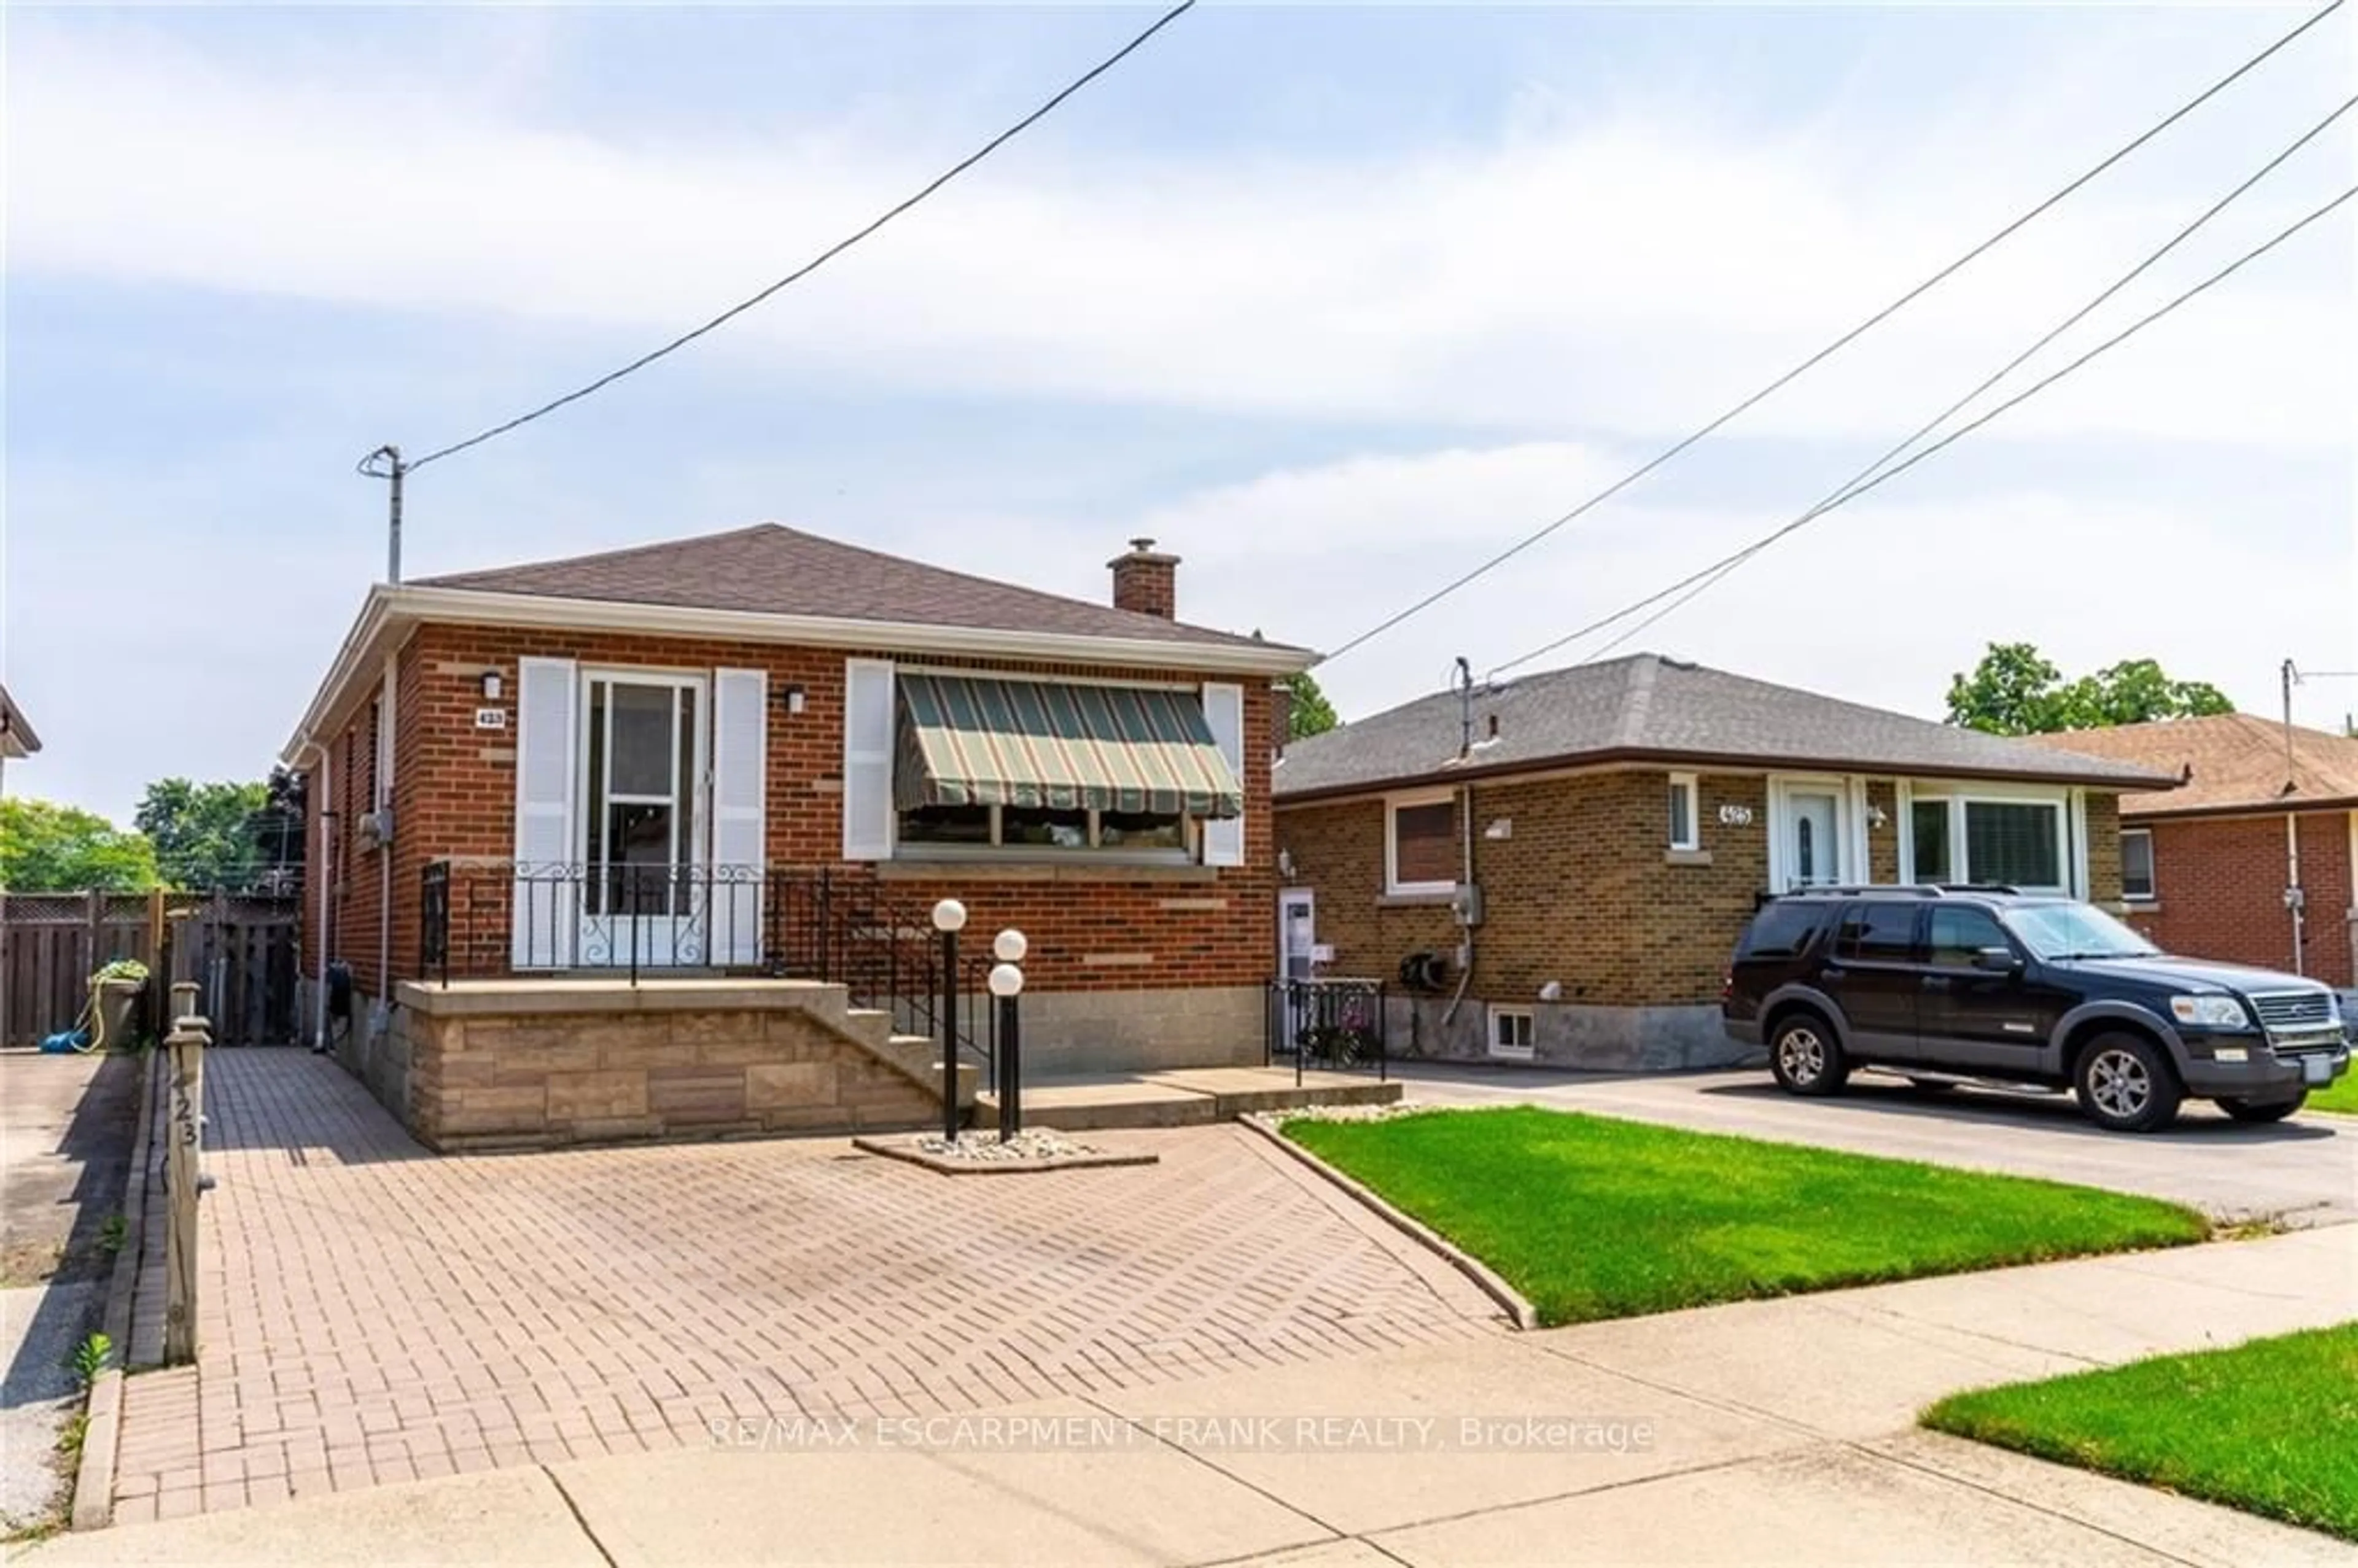 Home with brick exterior material for 423 East 43rd St, Hamilton Ontario L8T 3E4